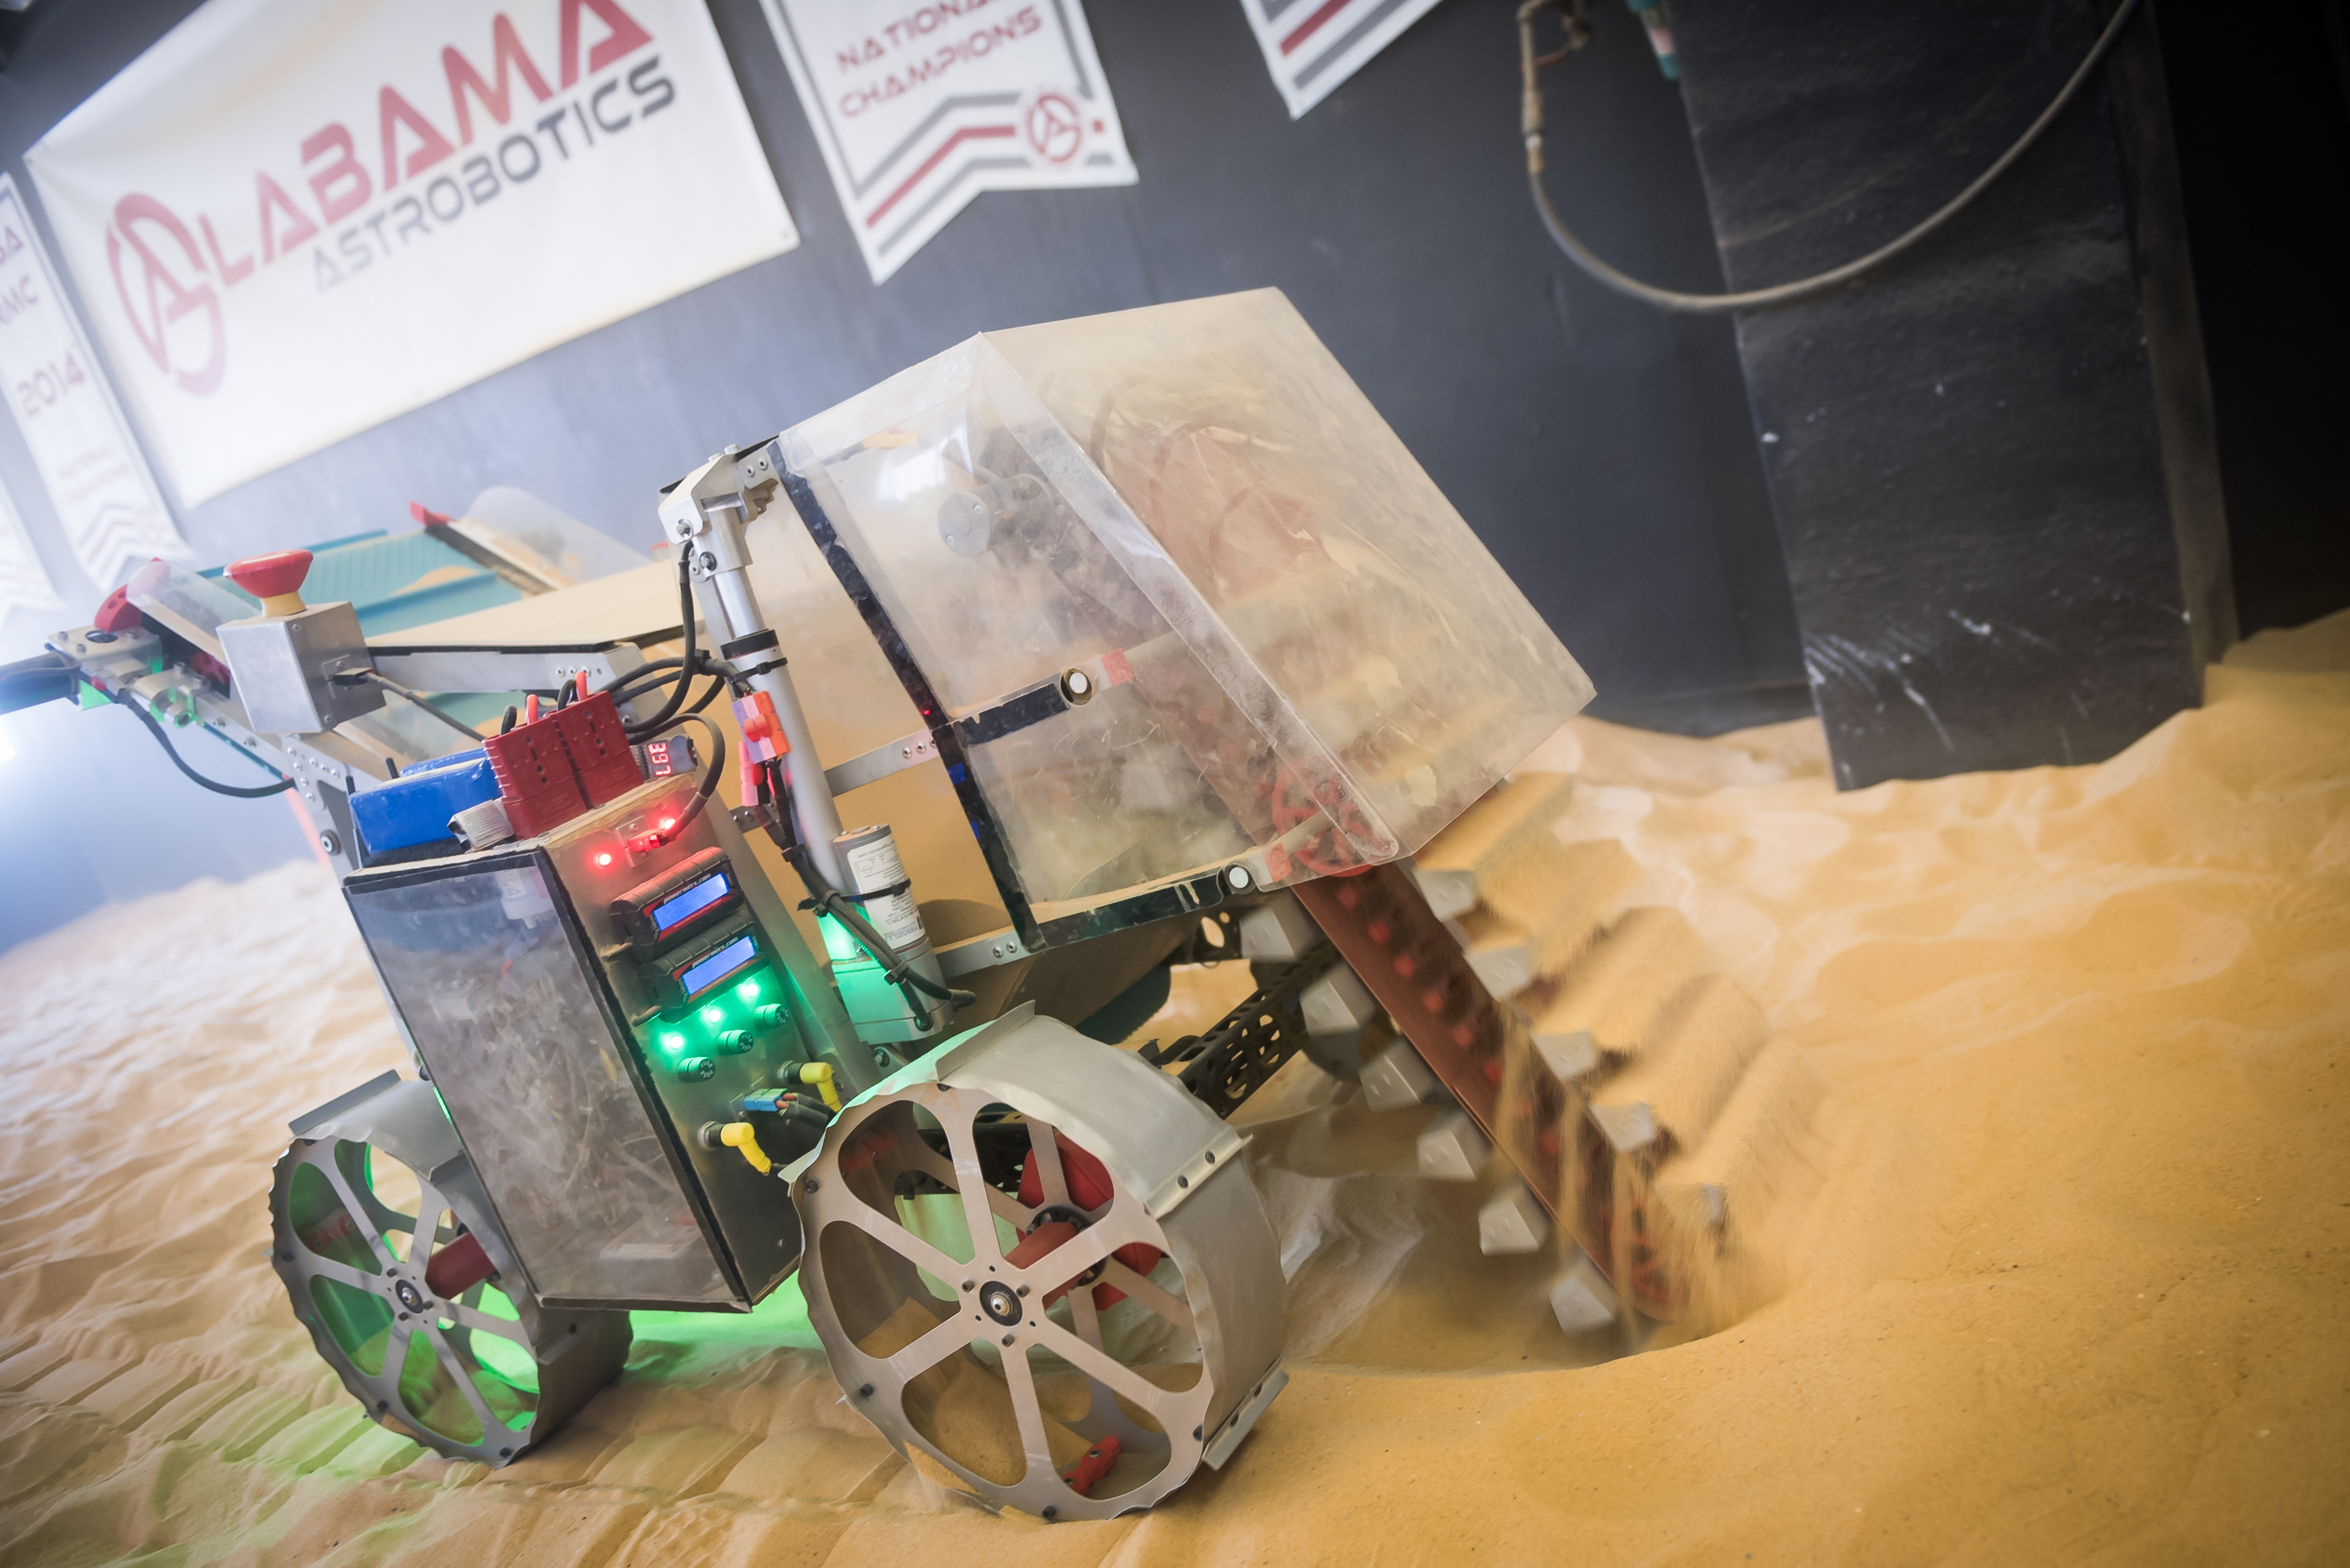 UA Robotics Team Aims for Three Championships in a Row